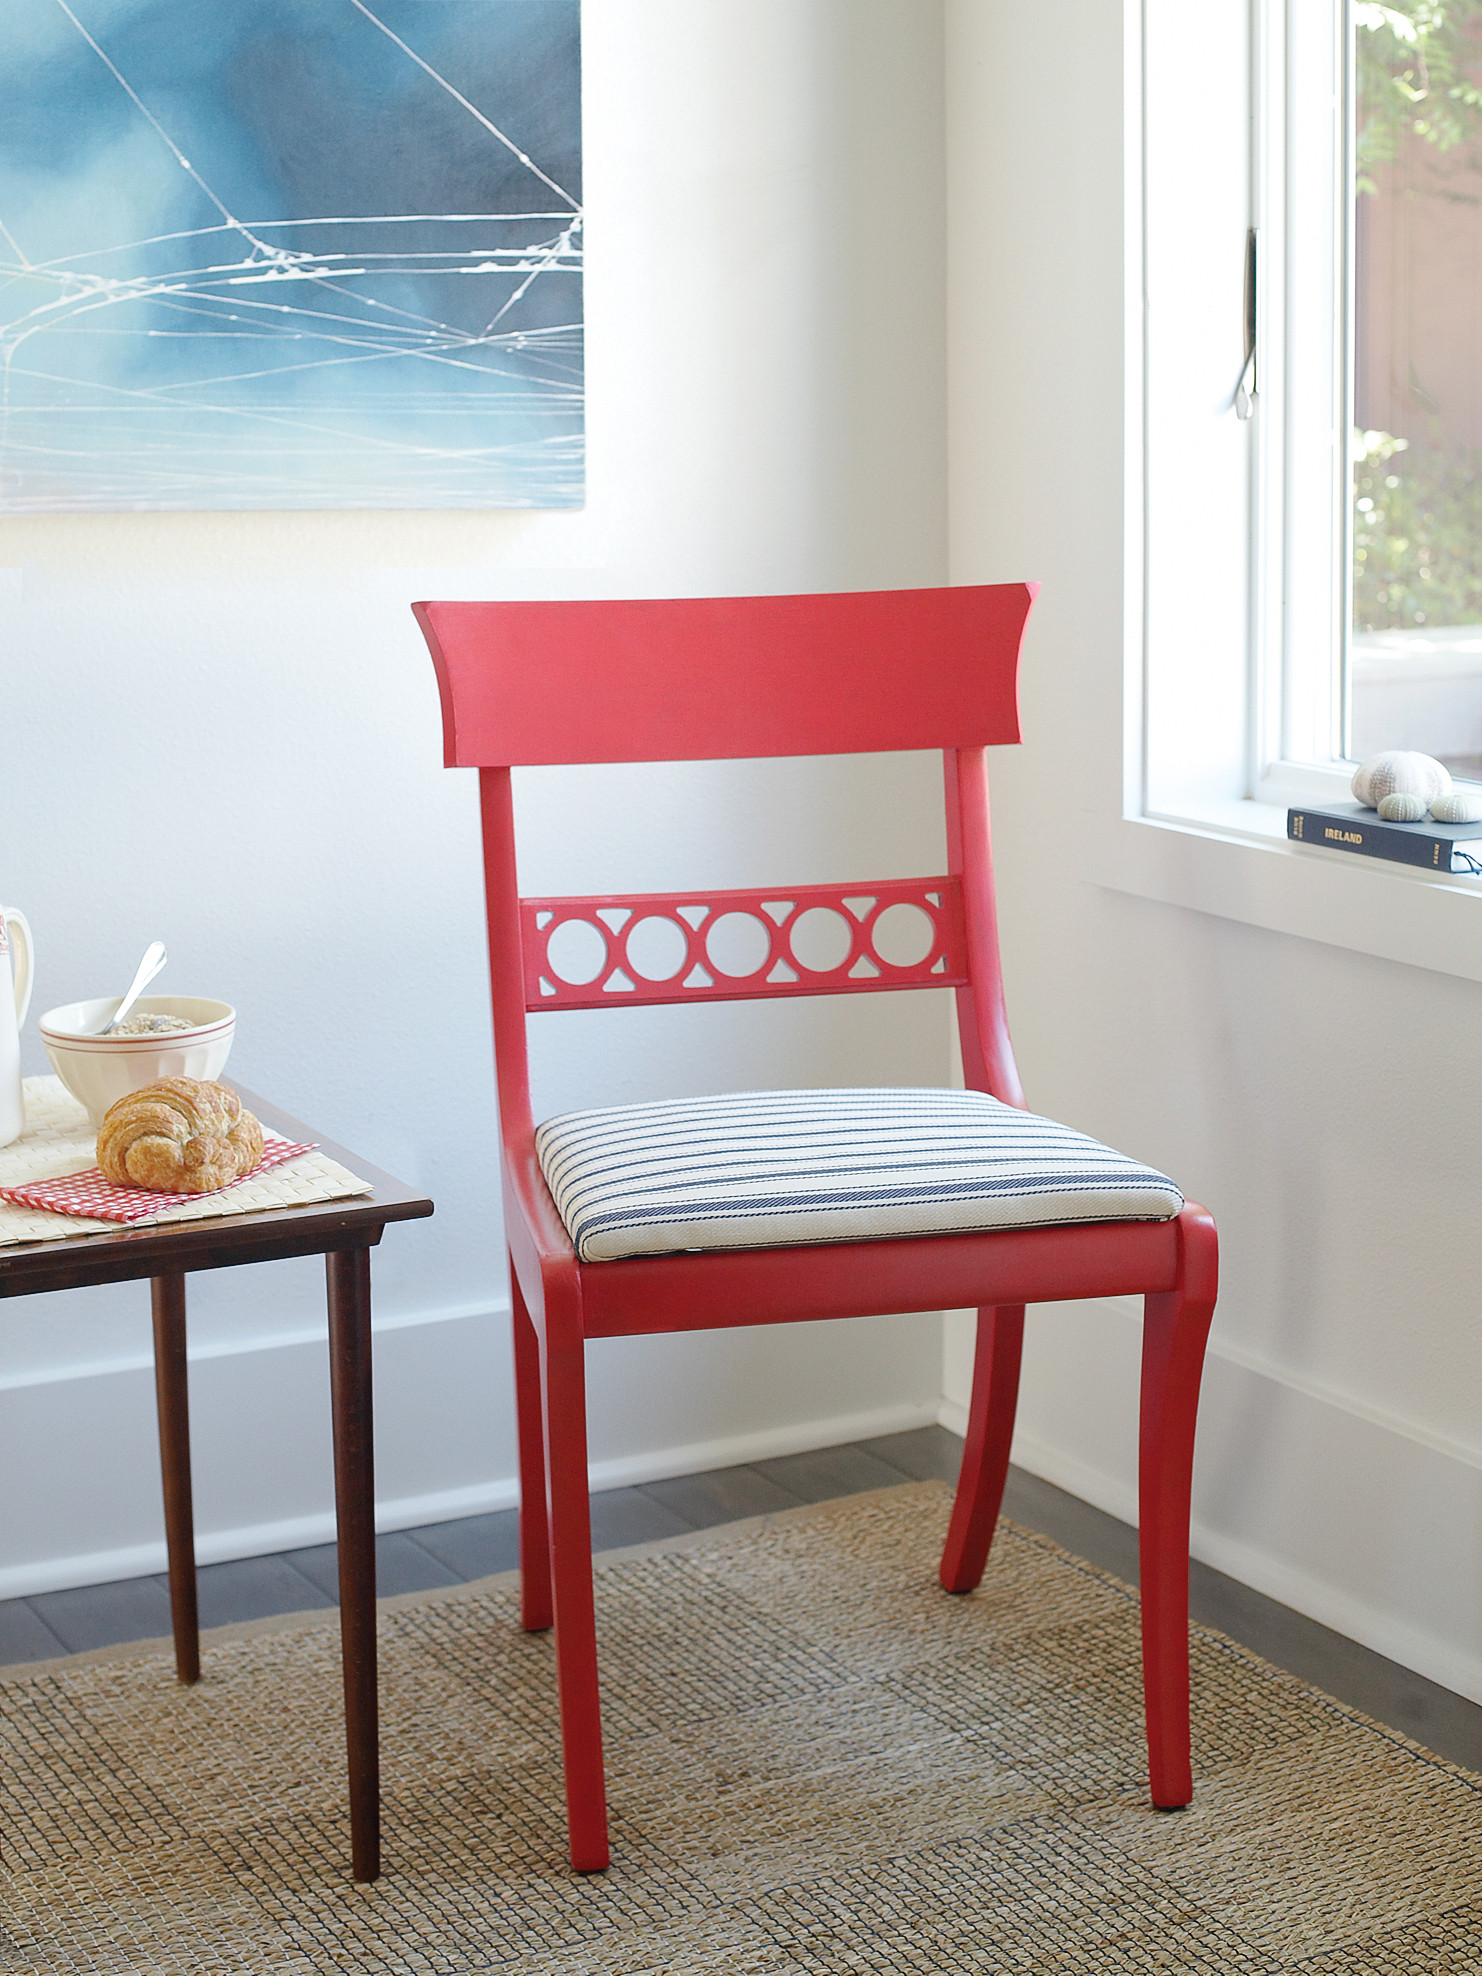 DIY Roman Chair
 54 Home Decorating Projects Sunset Magazine